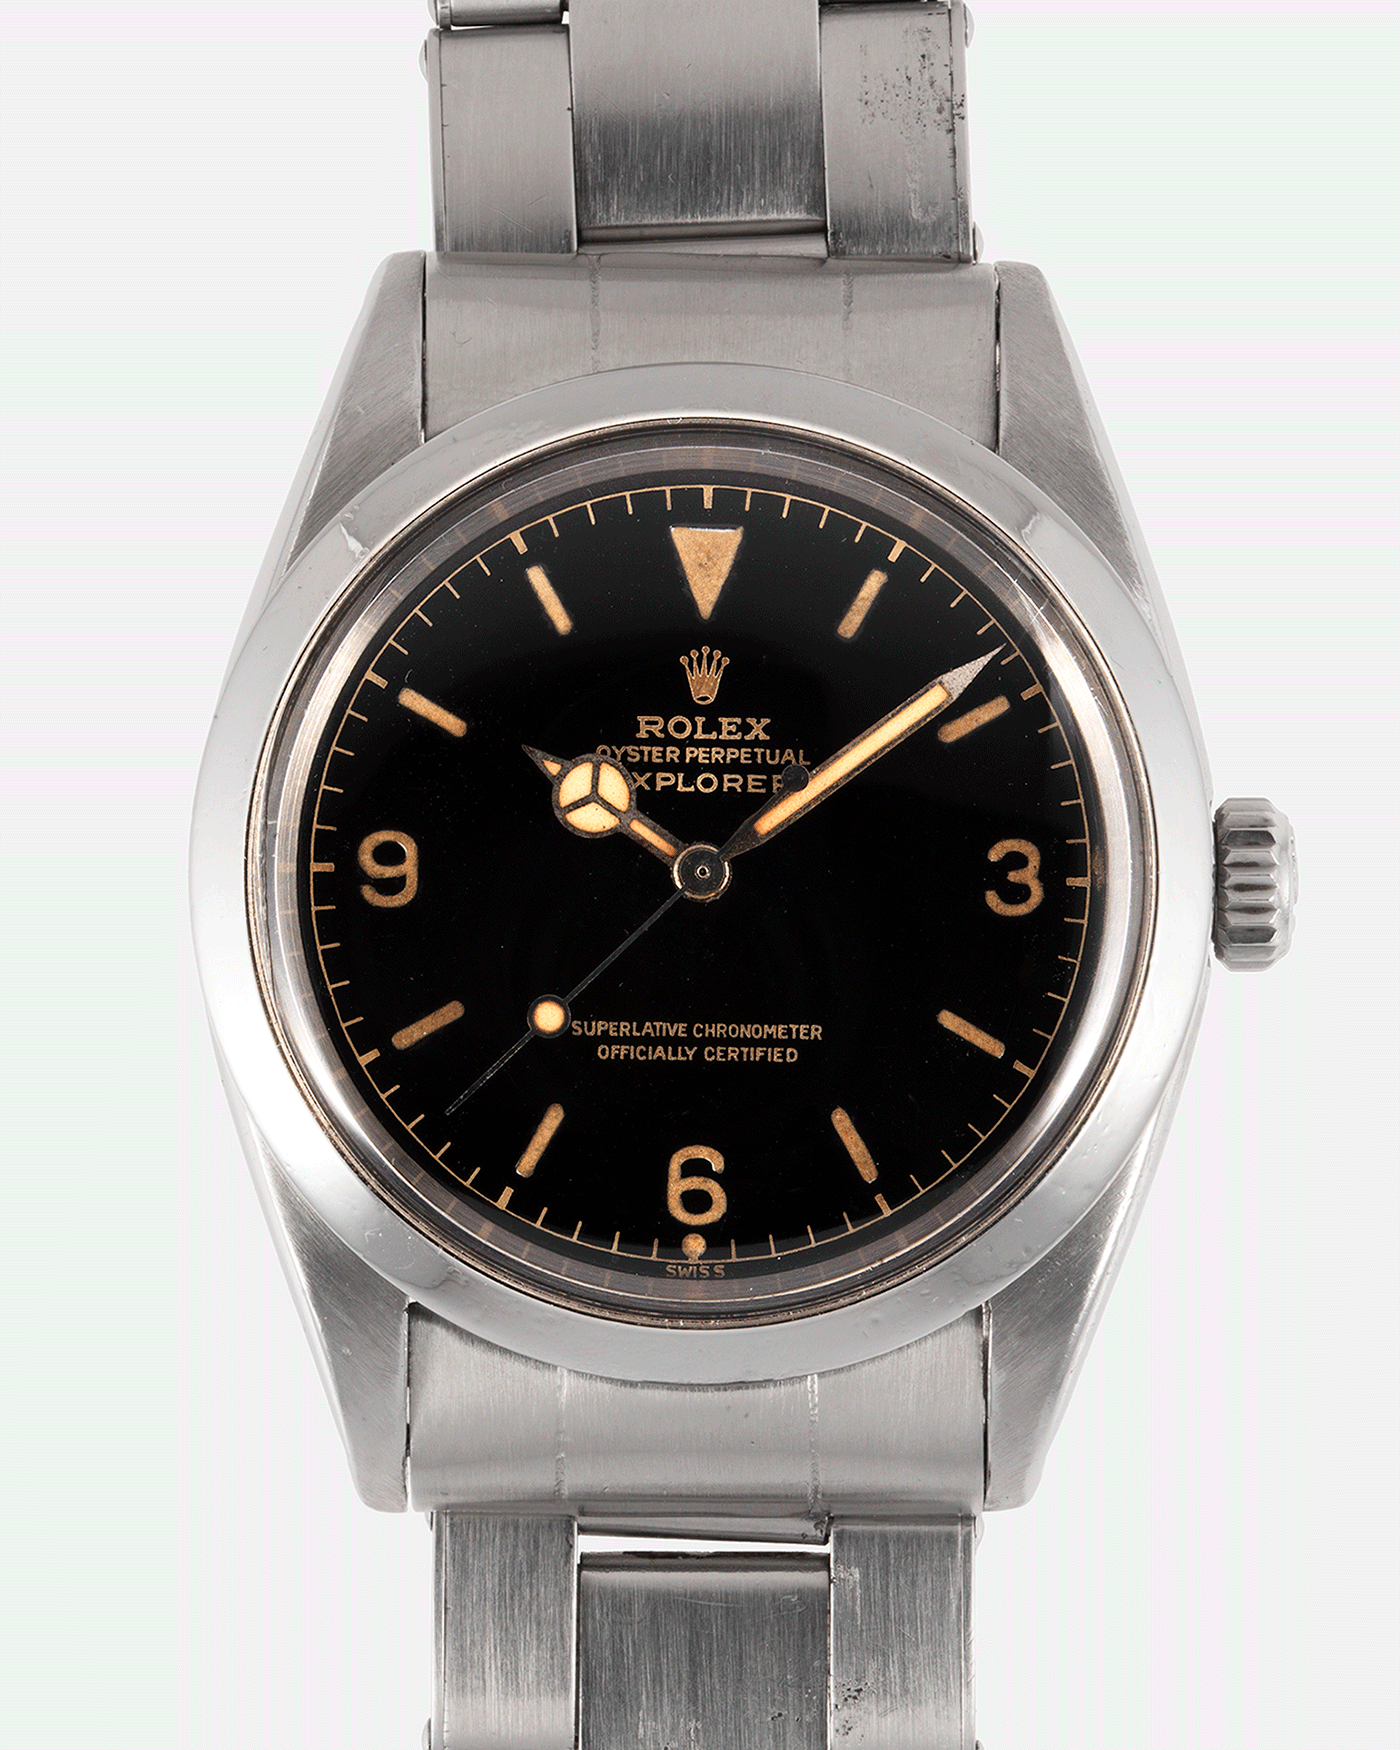 Brand: Rolex Year: Circa 1962 Model: Explorer Reference Number: 1016 Serial Number: 74XXXX Material: Stainless Steel Movement: Cal. 1560 Case Diameter: 36mm Lug Width: 20mm Bracelet/Strap: Rolex 7206 Rivet Bracelet with 58 end links dated 4.62